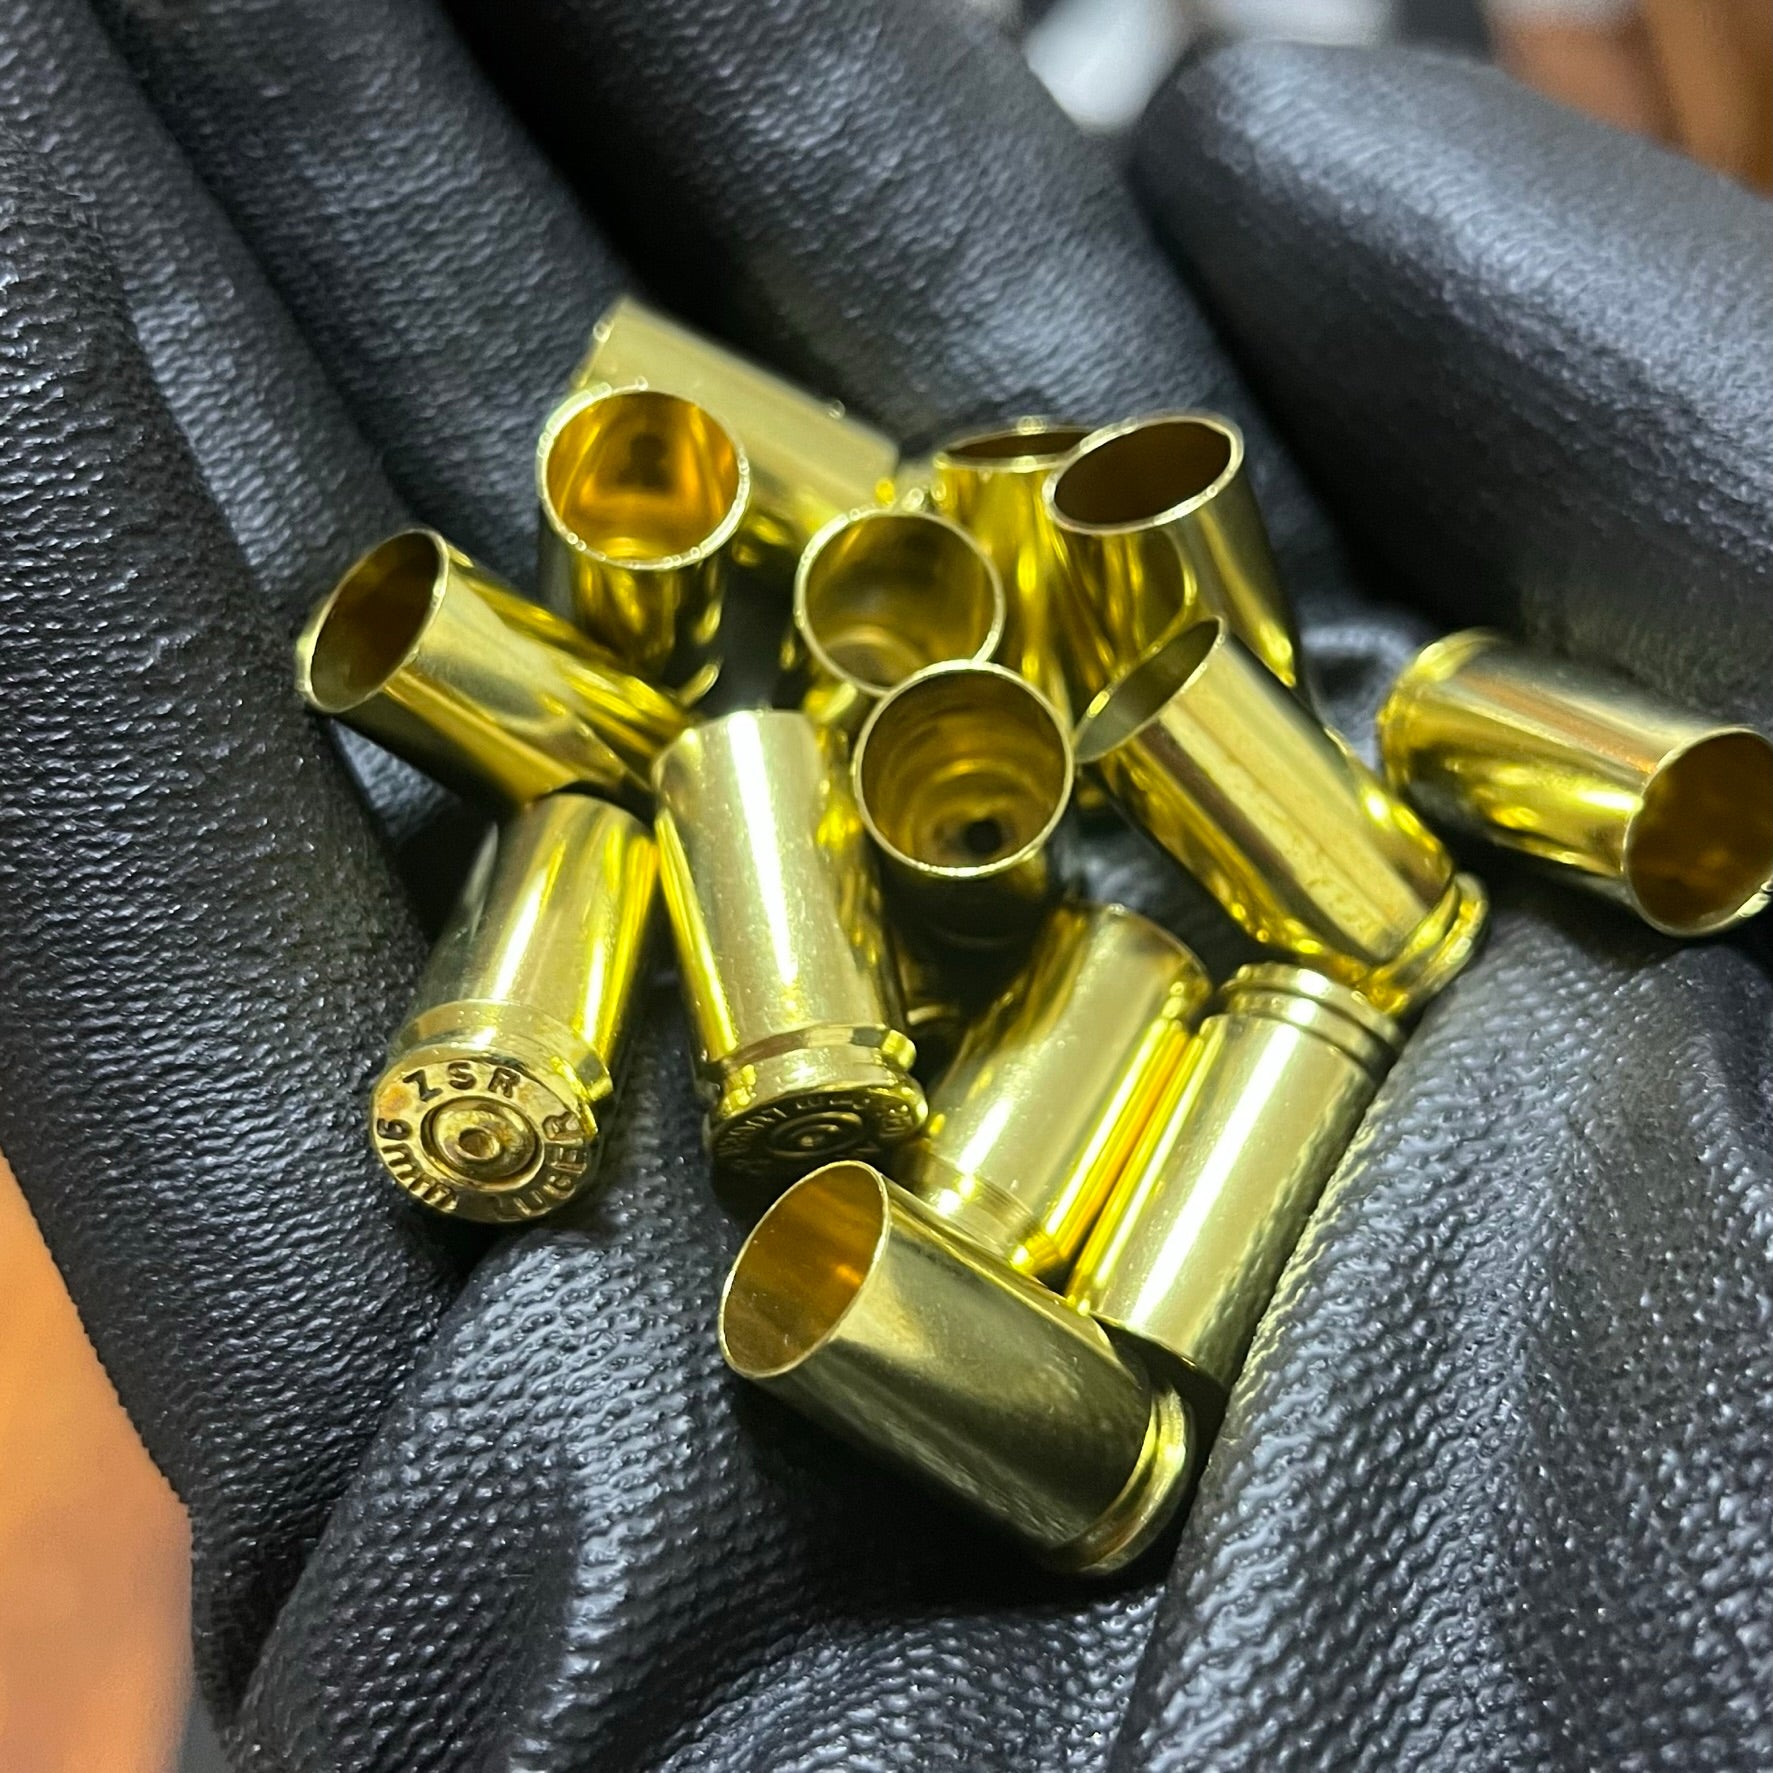 9MM Brass Shells Empty Used Spent Casings Luger 9X19 Uncleaned